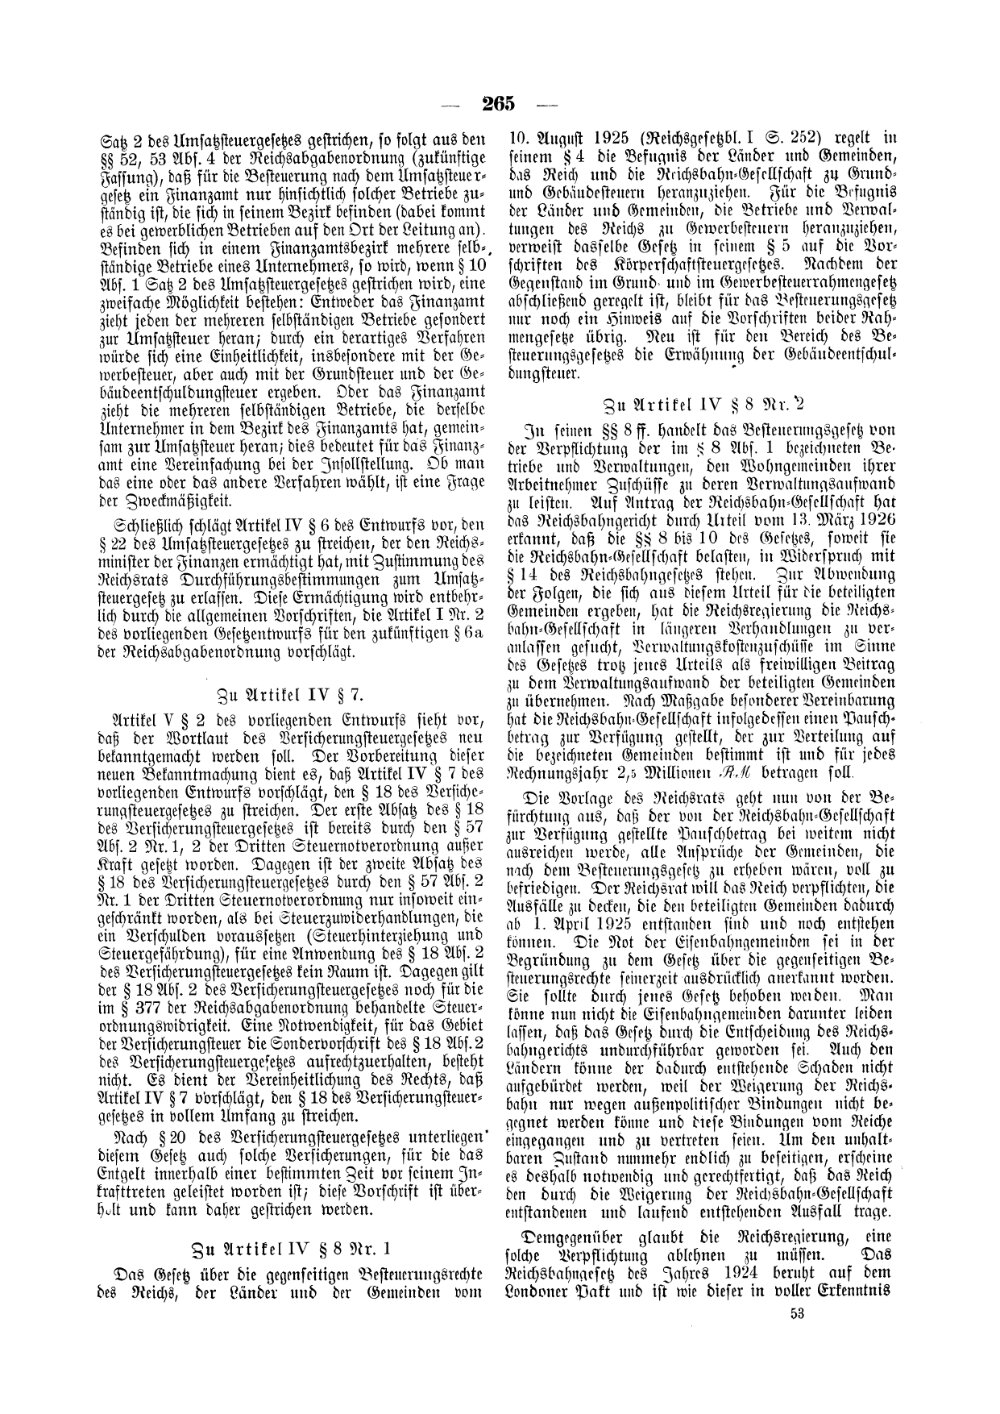 Scan of page 265